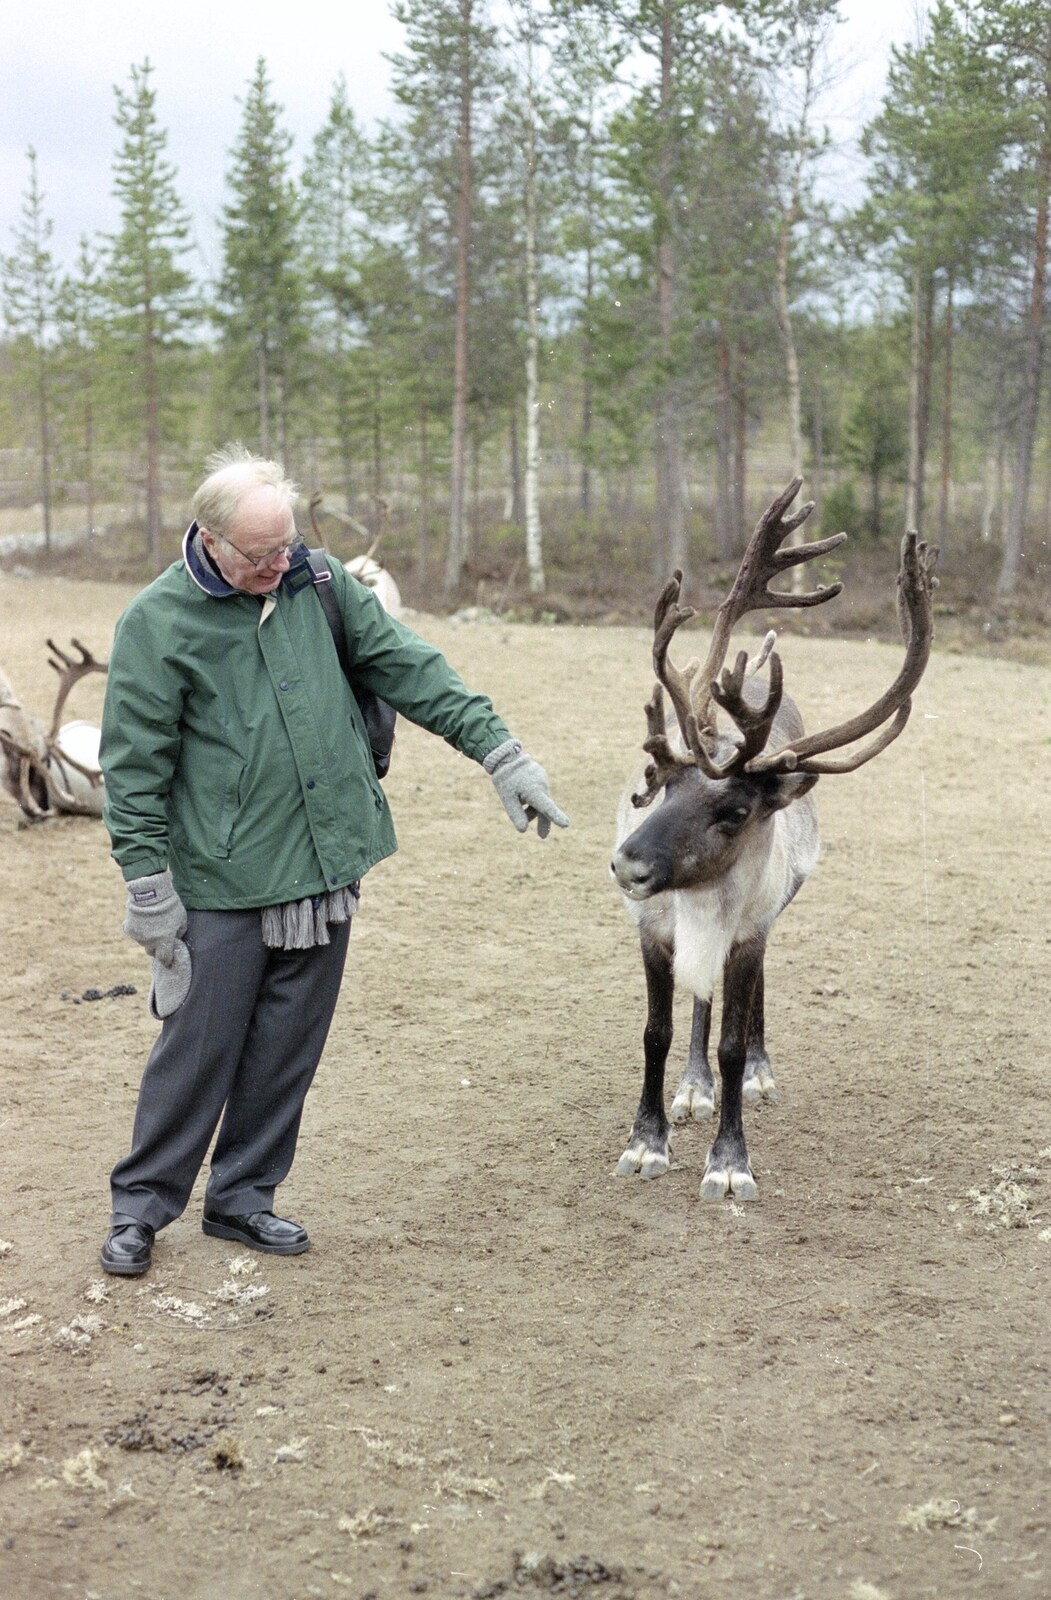 The Old Man points at a reindeer from A Trip to Rovaniemi and the Arctic Circle, Lapland, Finland - 28th November 1999